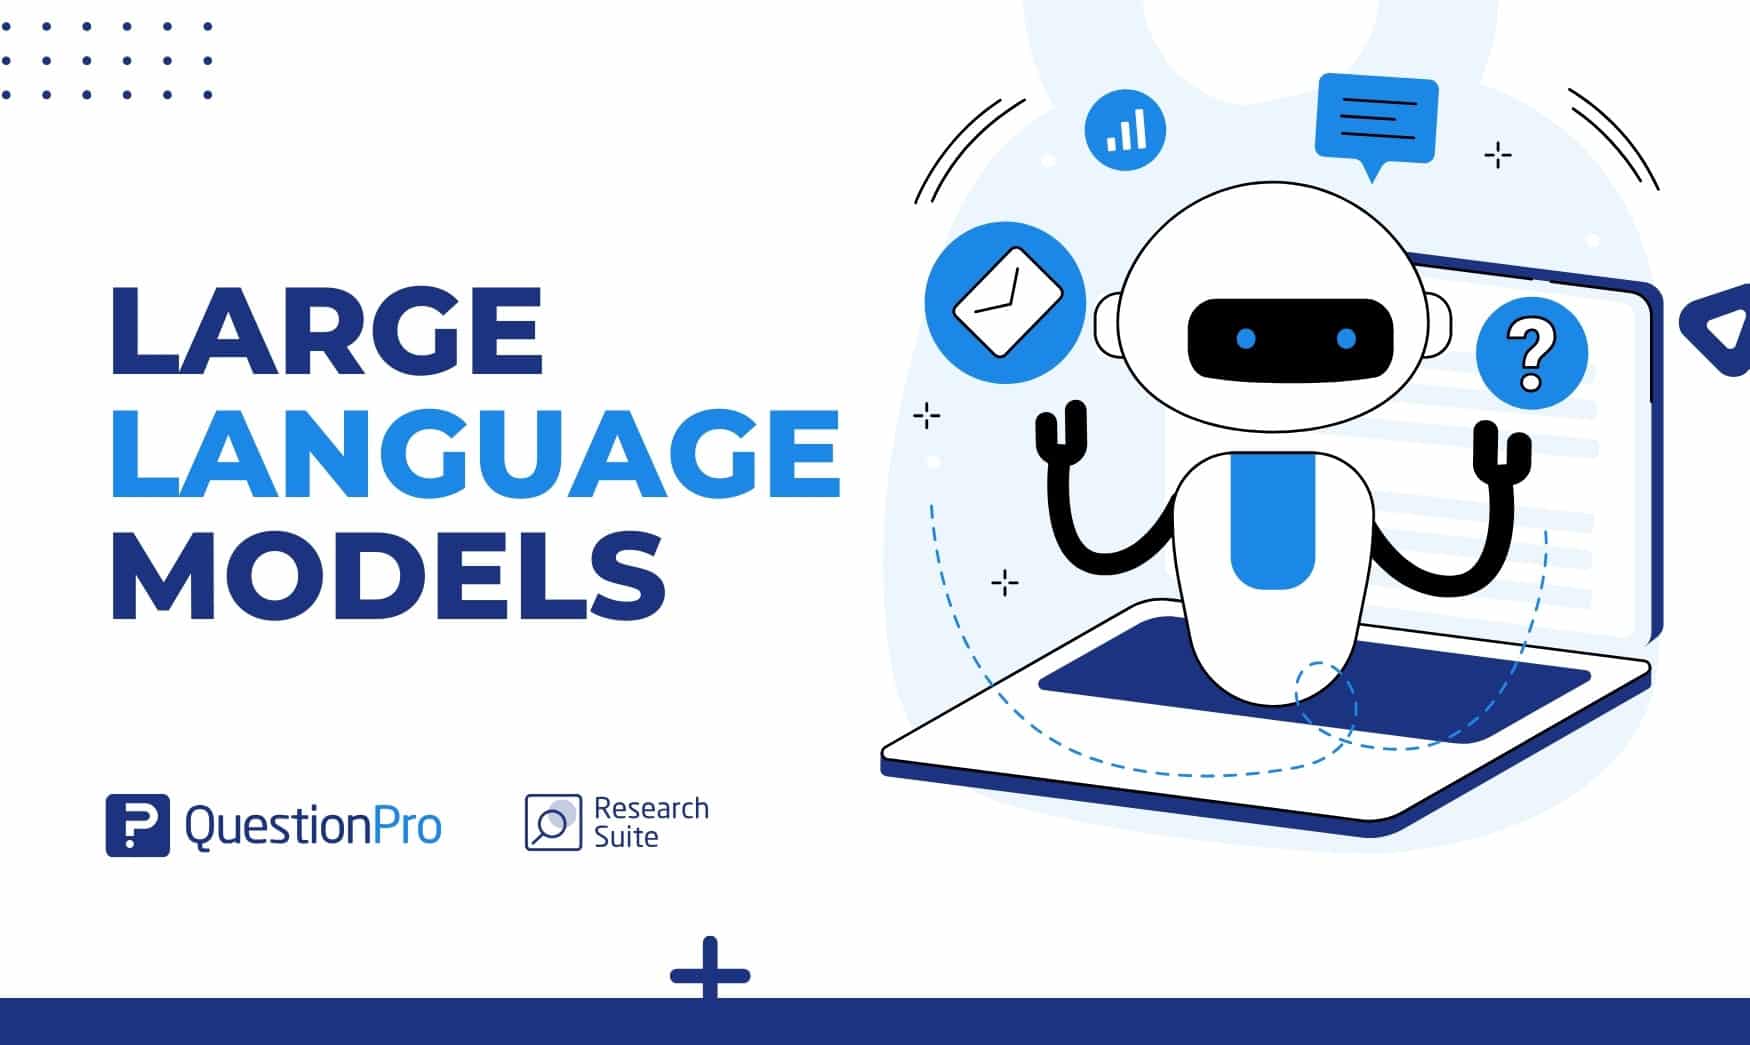 Large Language Models learn and generate human-like language from vast text data. Explore everything about it in this article.